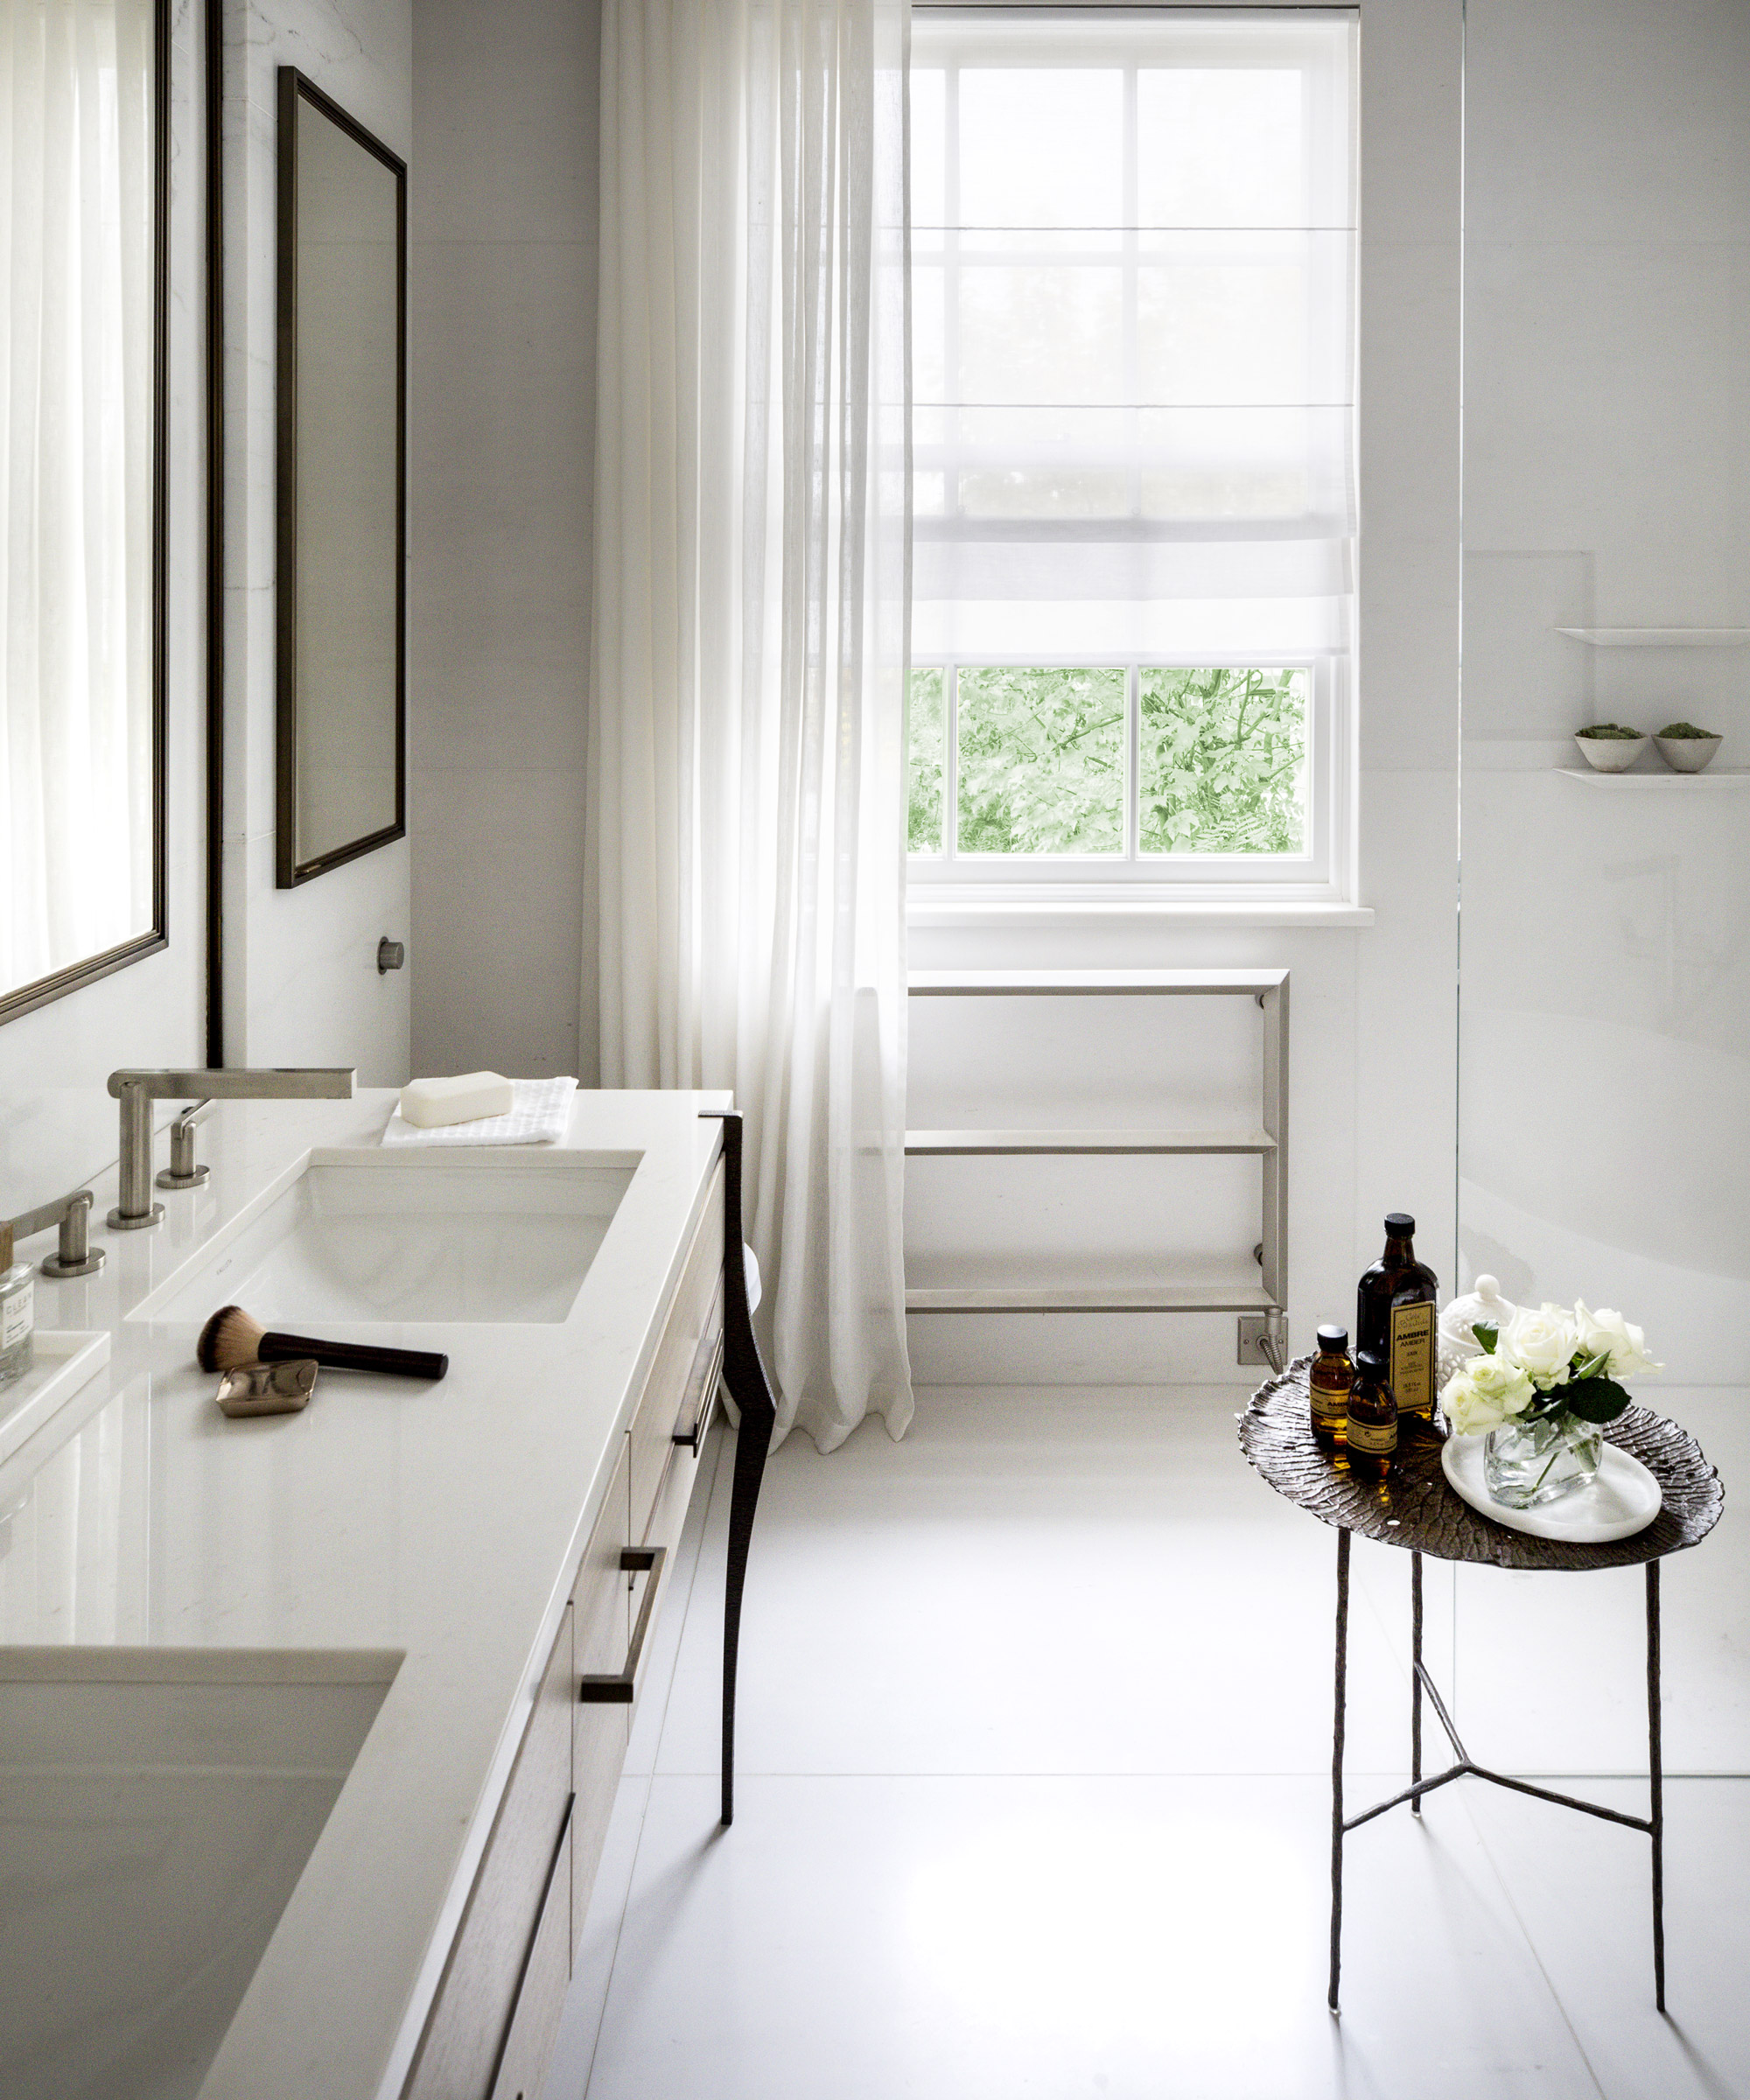 How high should a bathroom vanity be? Designers share…